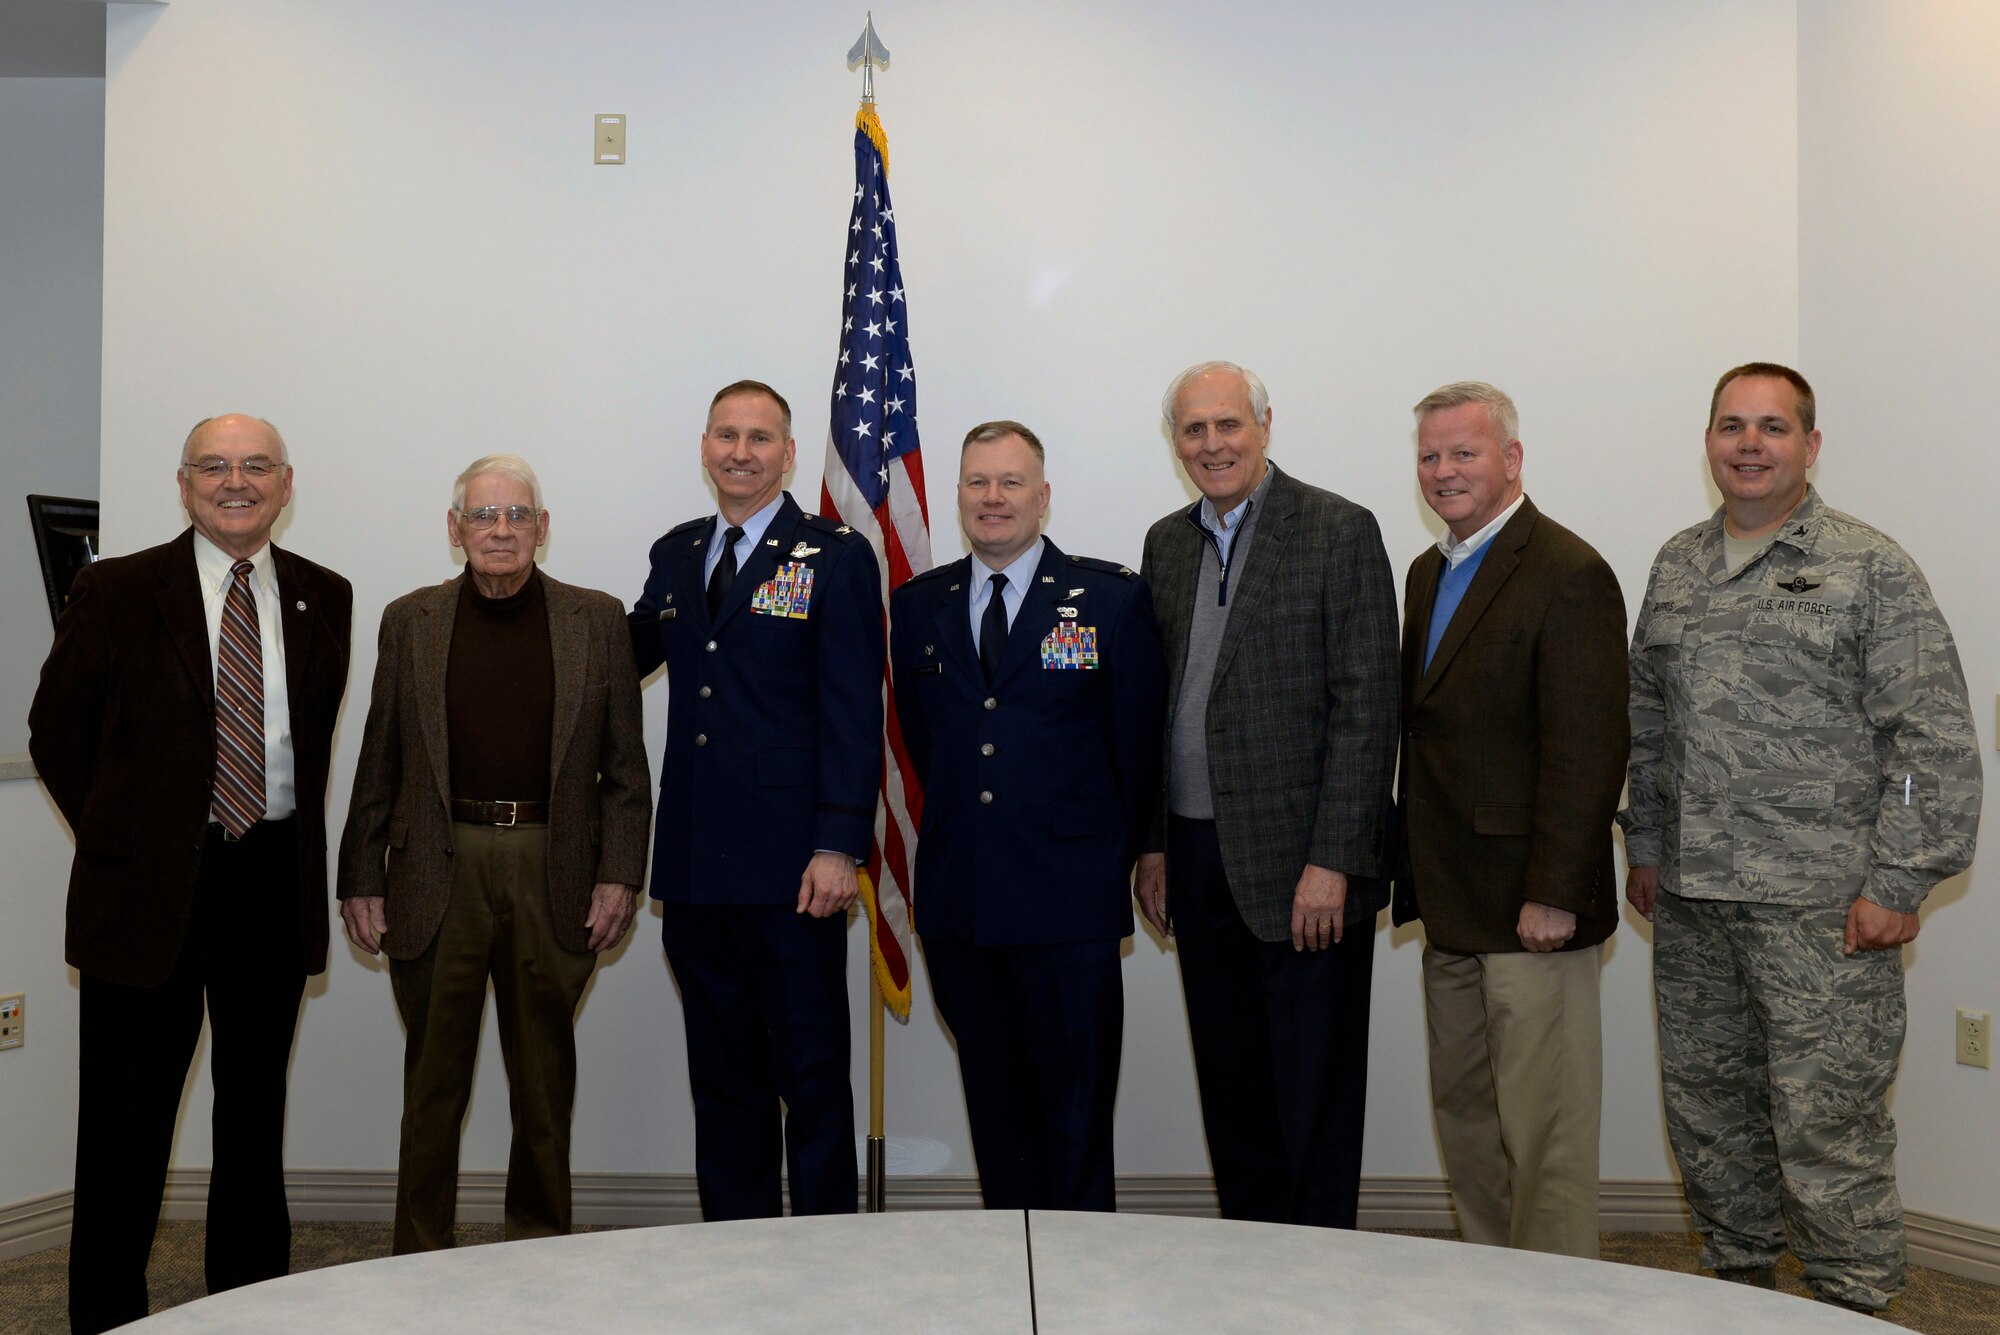 The incoming, current, and former commanders of the 157th Air Refueling Wing pose for a picture prior to a change of command ceremony at Pease Air National Guard Base, N.H., March, 10, 2018. Col. John Pogorek assumed command of the wing at a ceremony held later in the day.(N.H. Air National Guard photo by Senior Airman Taylor Queen)